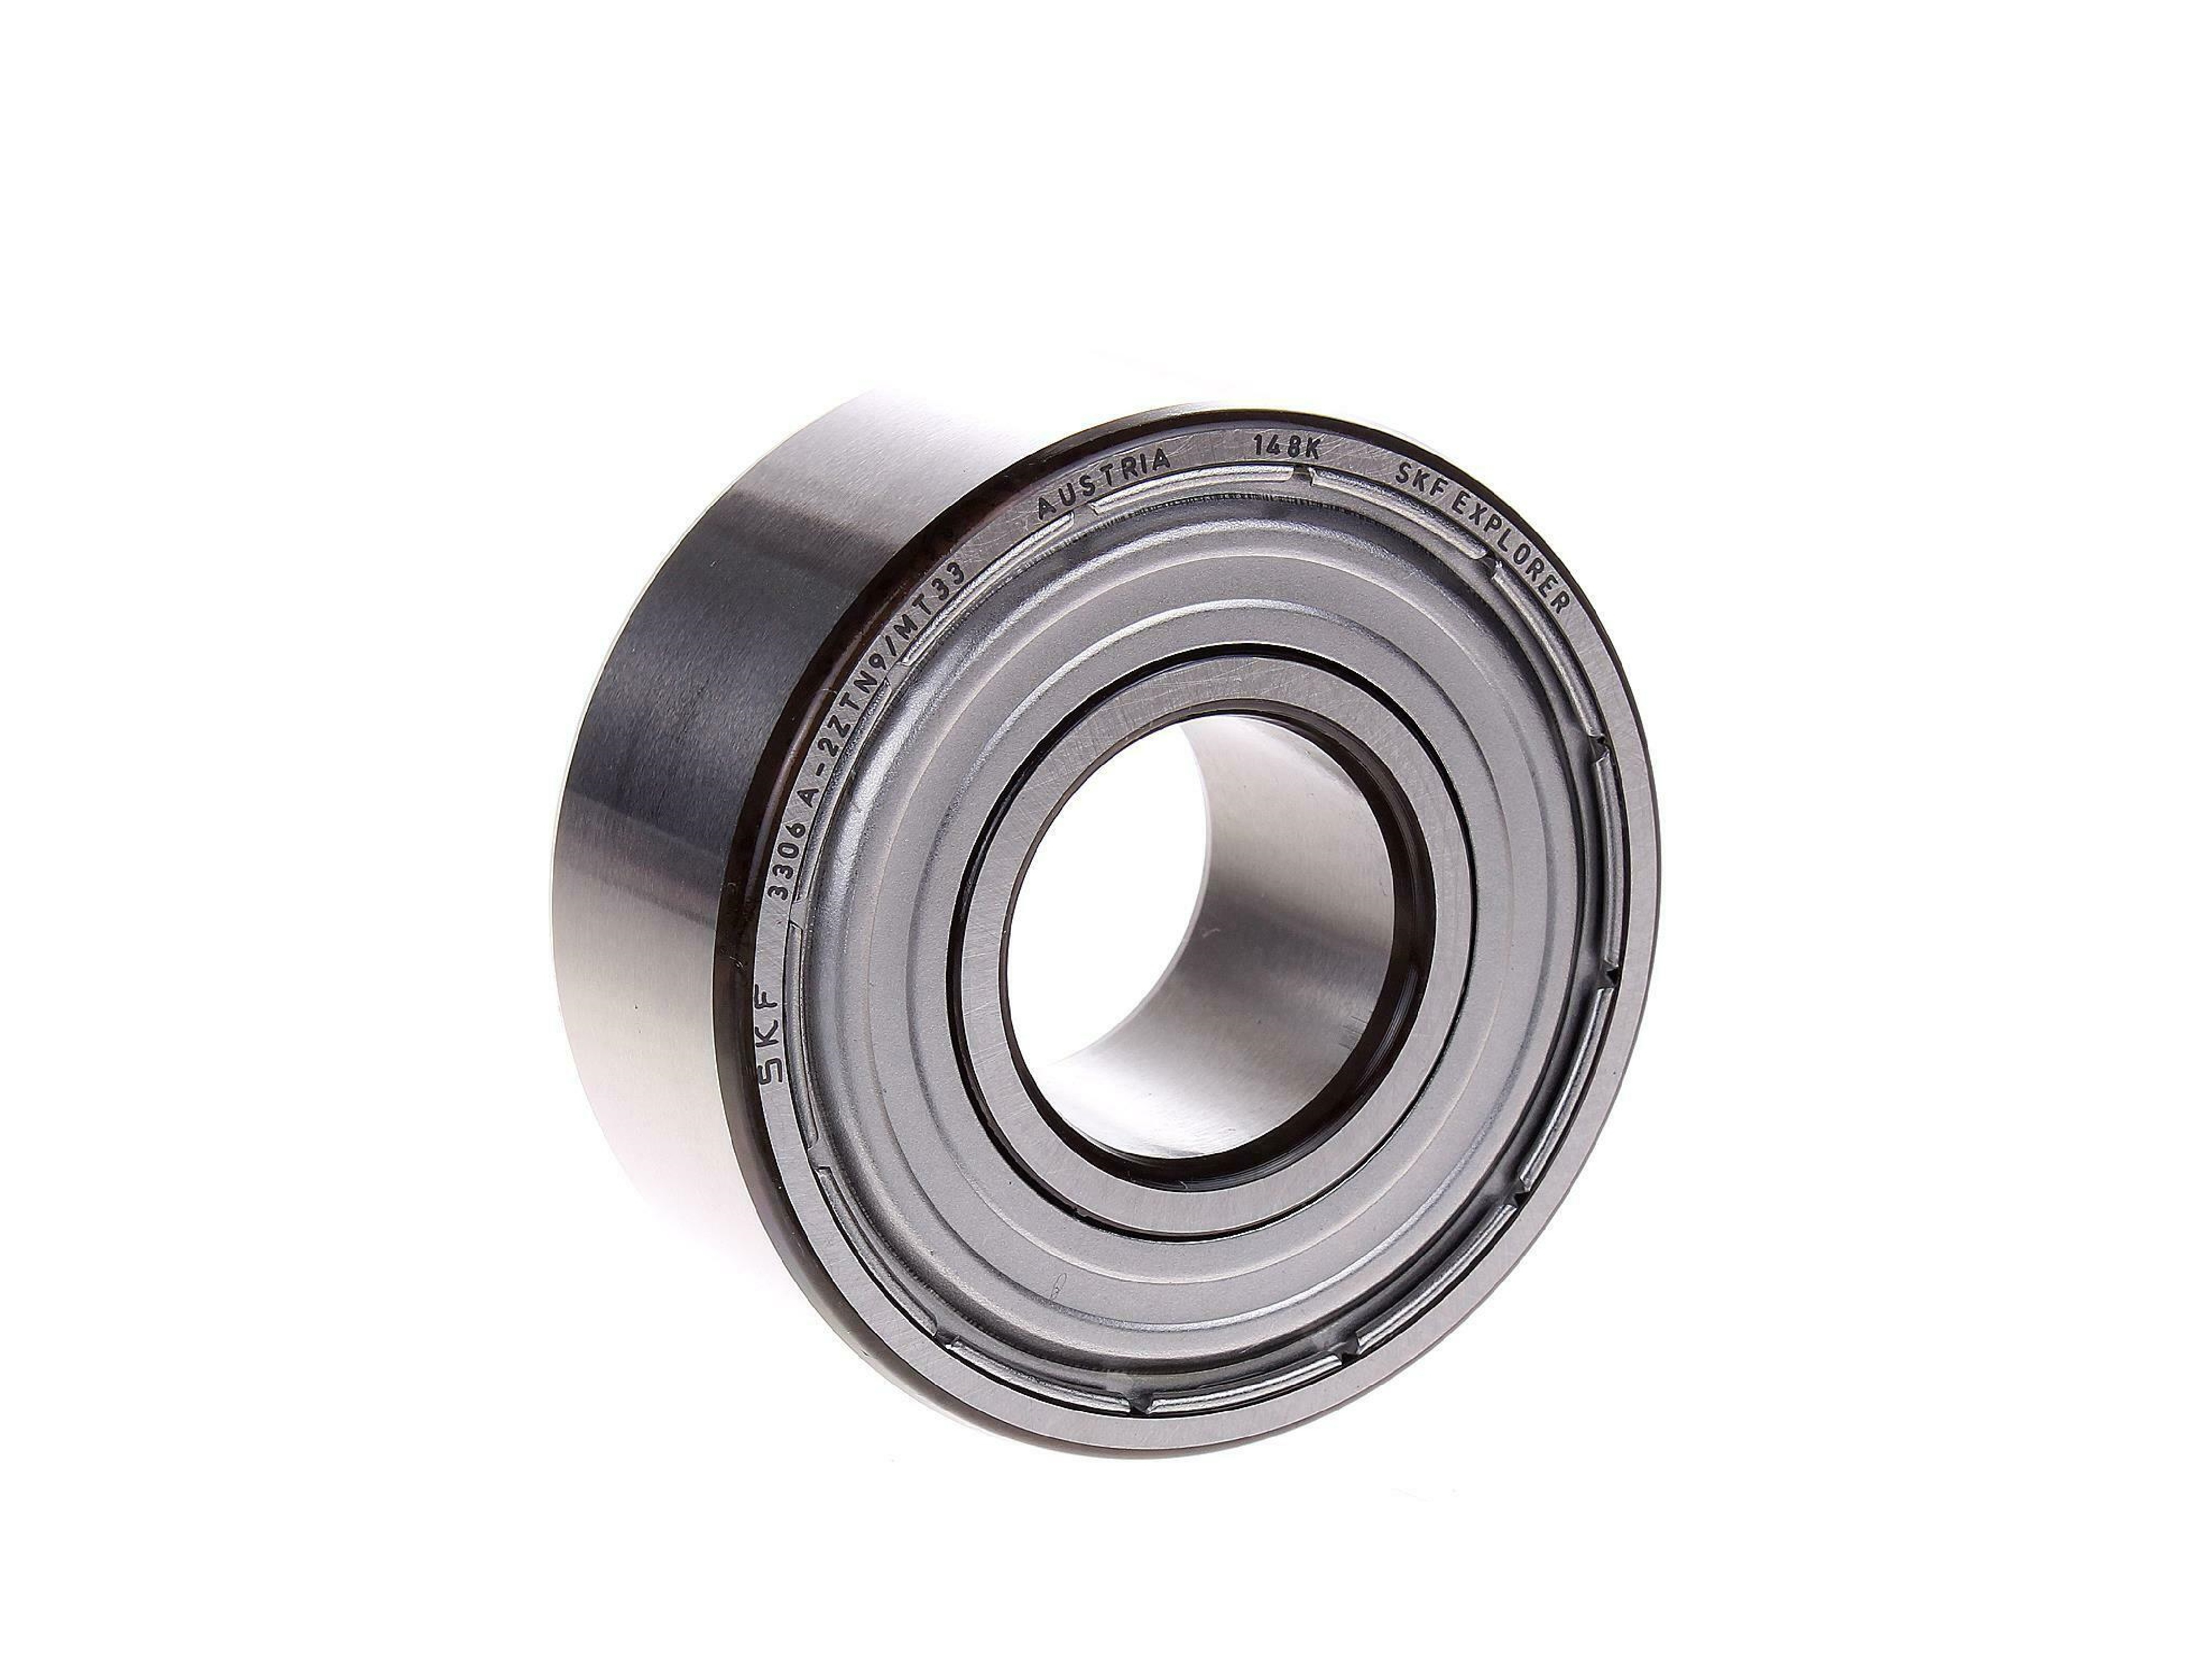 3202A-2ZTN9/MT33 SKF Double Row Angular Contact Ball Bearing - Shielded 15mm x 35mm x 15.9mm